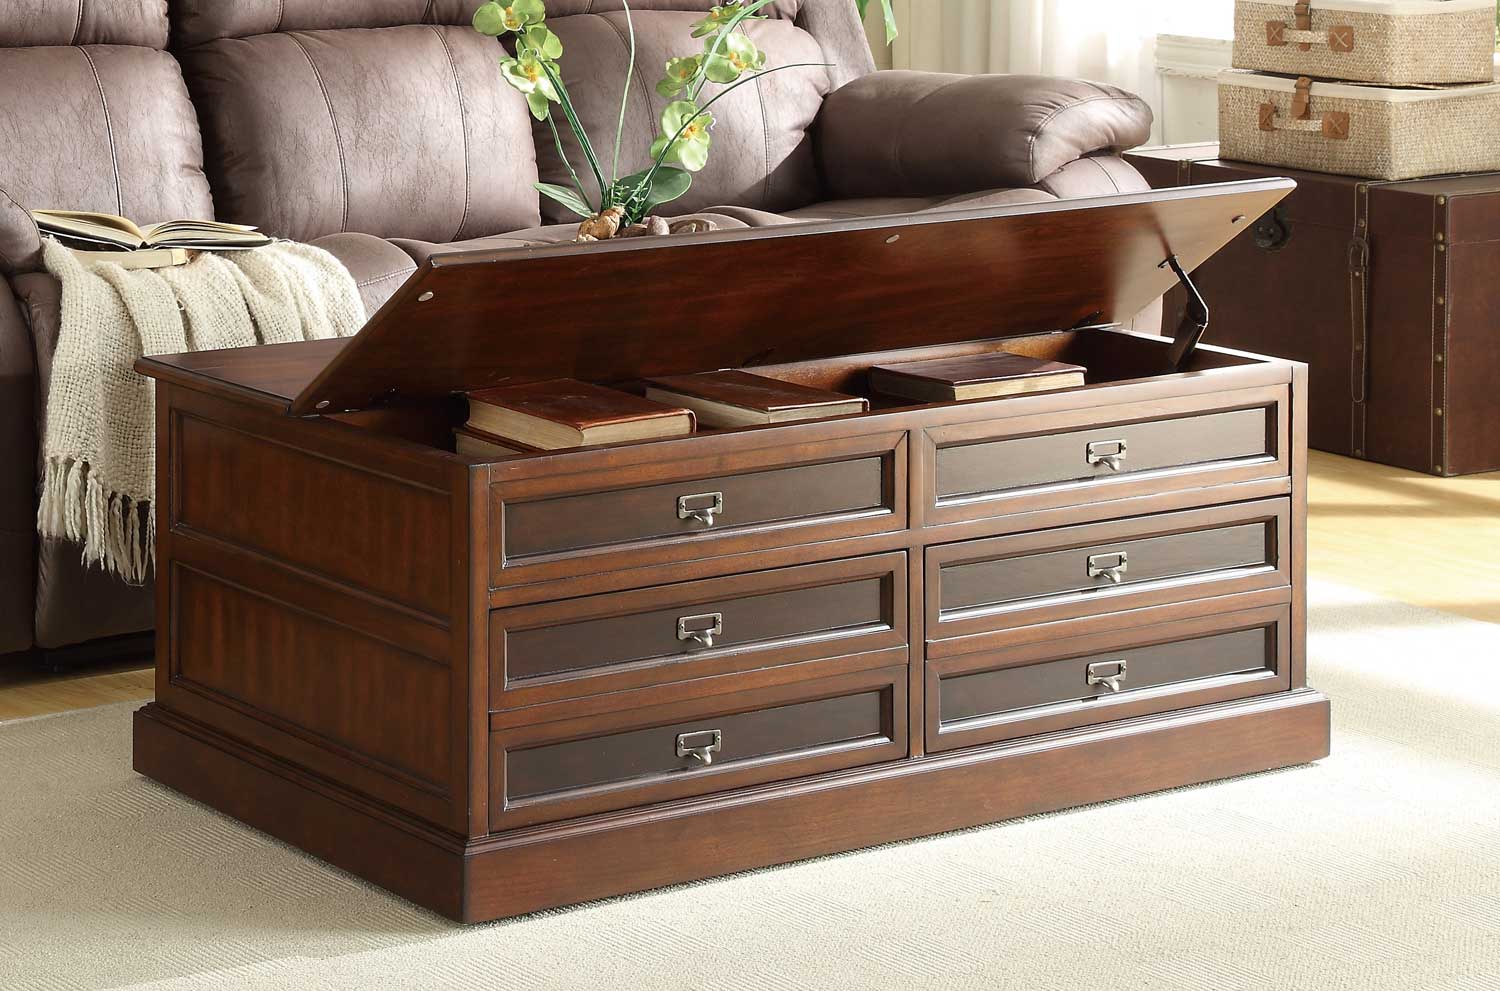 Homelegance Friedrich Cocktail Table with Lift Top on Casters - 2 Functional Drawers